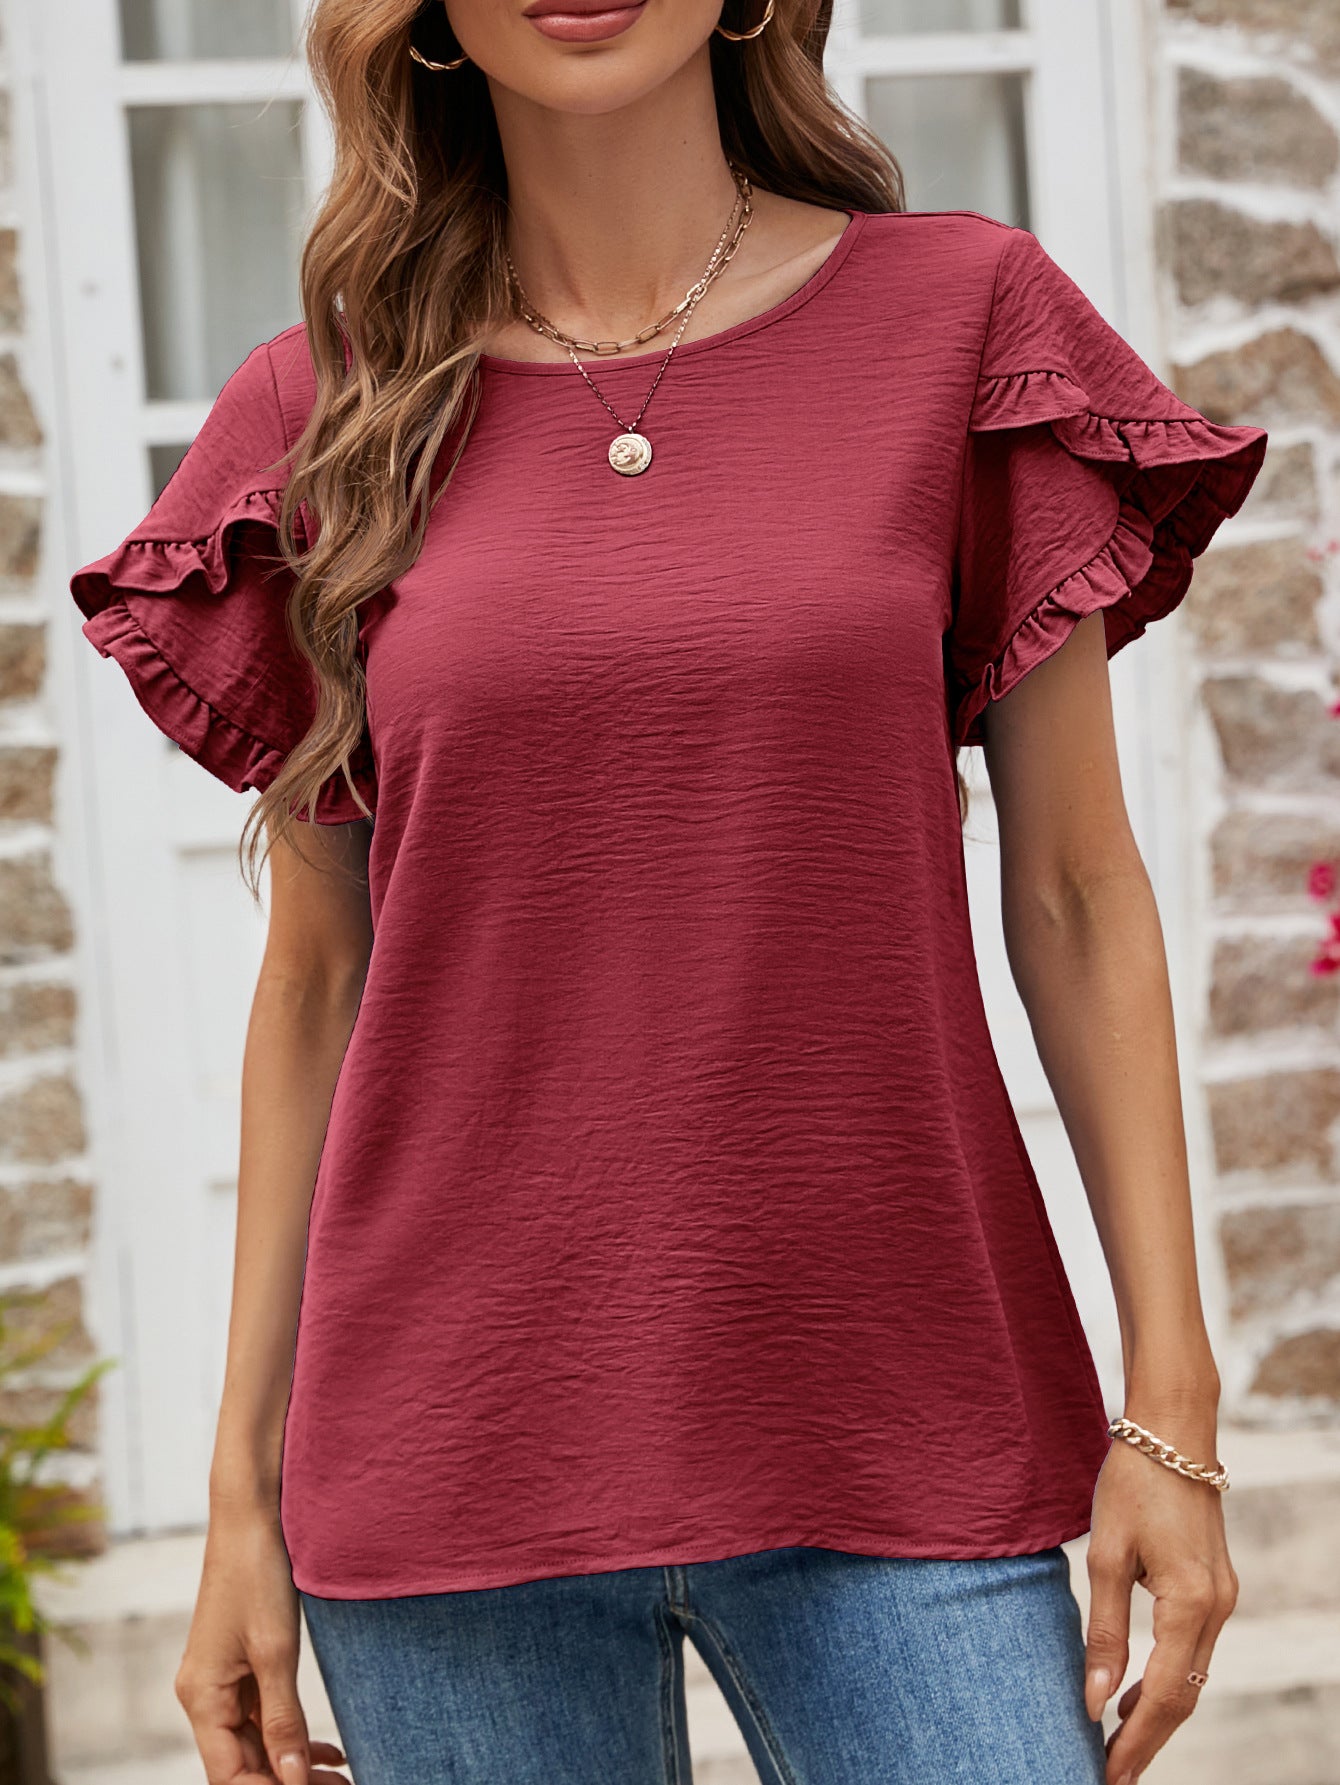 Textured Petal Sleeve Round Neck Tee - Kawaii Stop - Casual-Chic Style, Changeable, Everyday Wear, Imported Fashion, Petal Sleeve Detail, Round Neck Tee, Ship From Overseas, Soft Polyester, Stylish and Comfortable, T-Shirt, T-Shirts, Tee, Textured Fabric, Women's Clothing, Women's Top